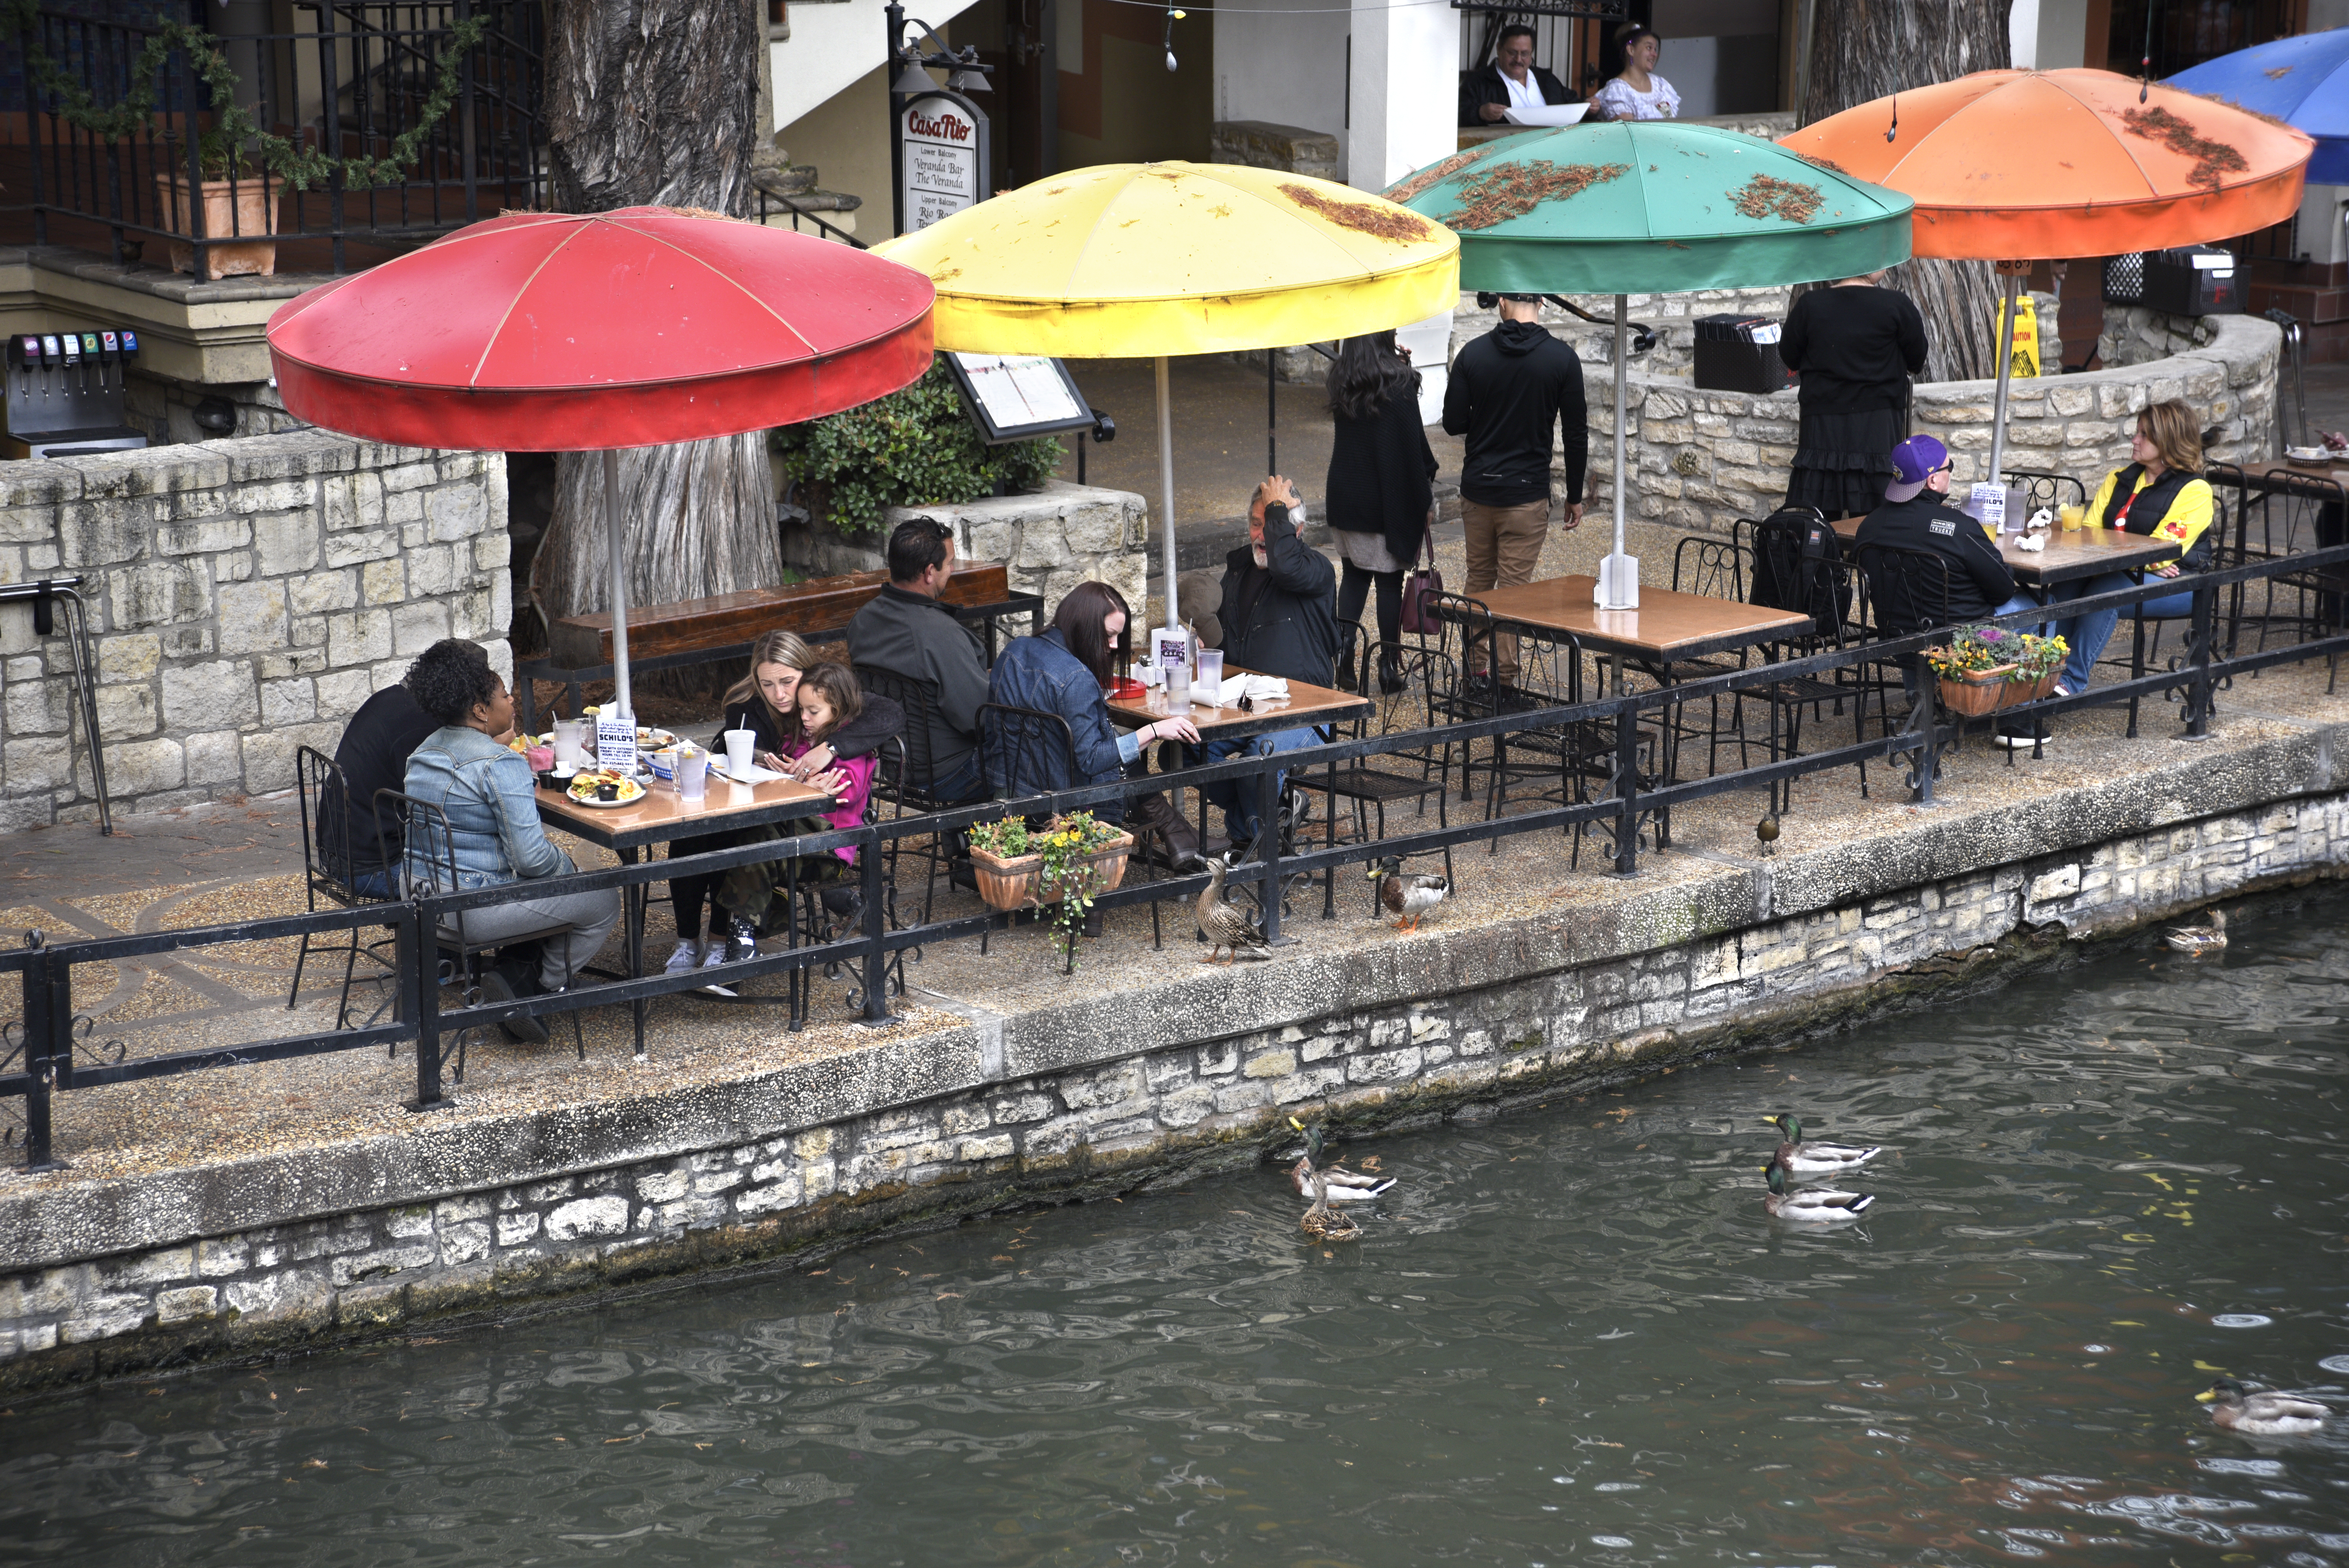 Restaurant customers enjoy their lunches beside the River Walk.